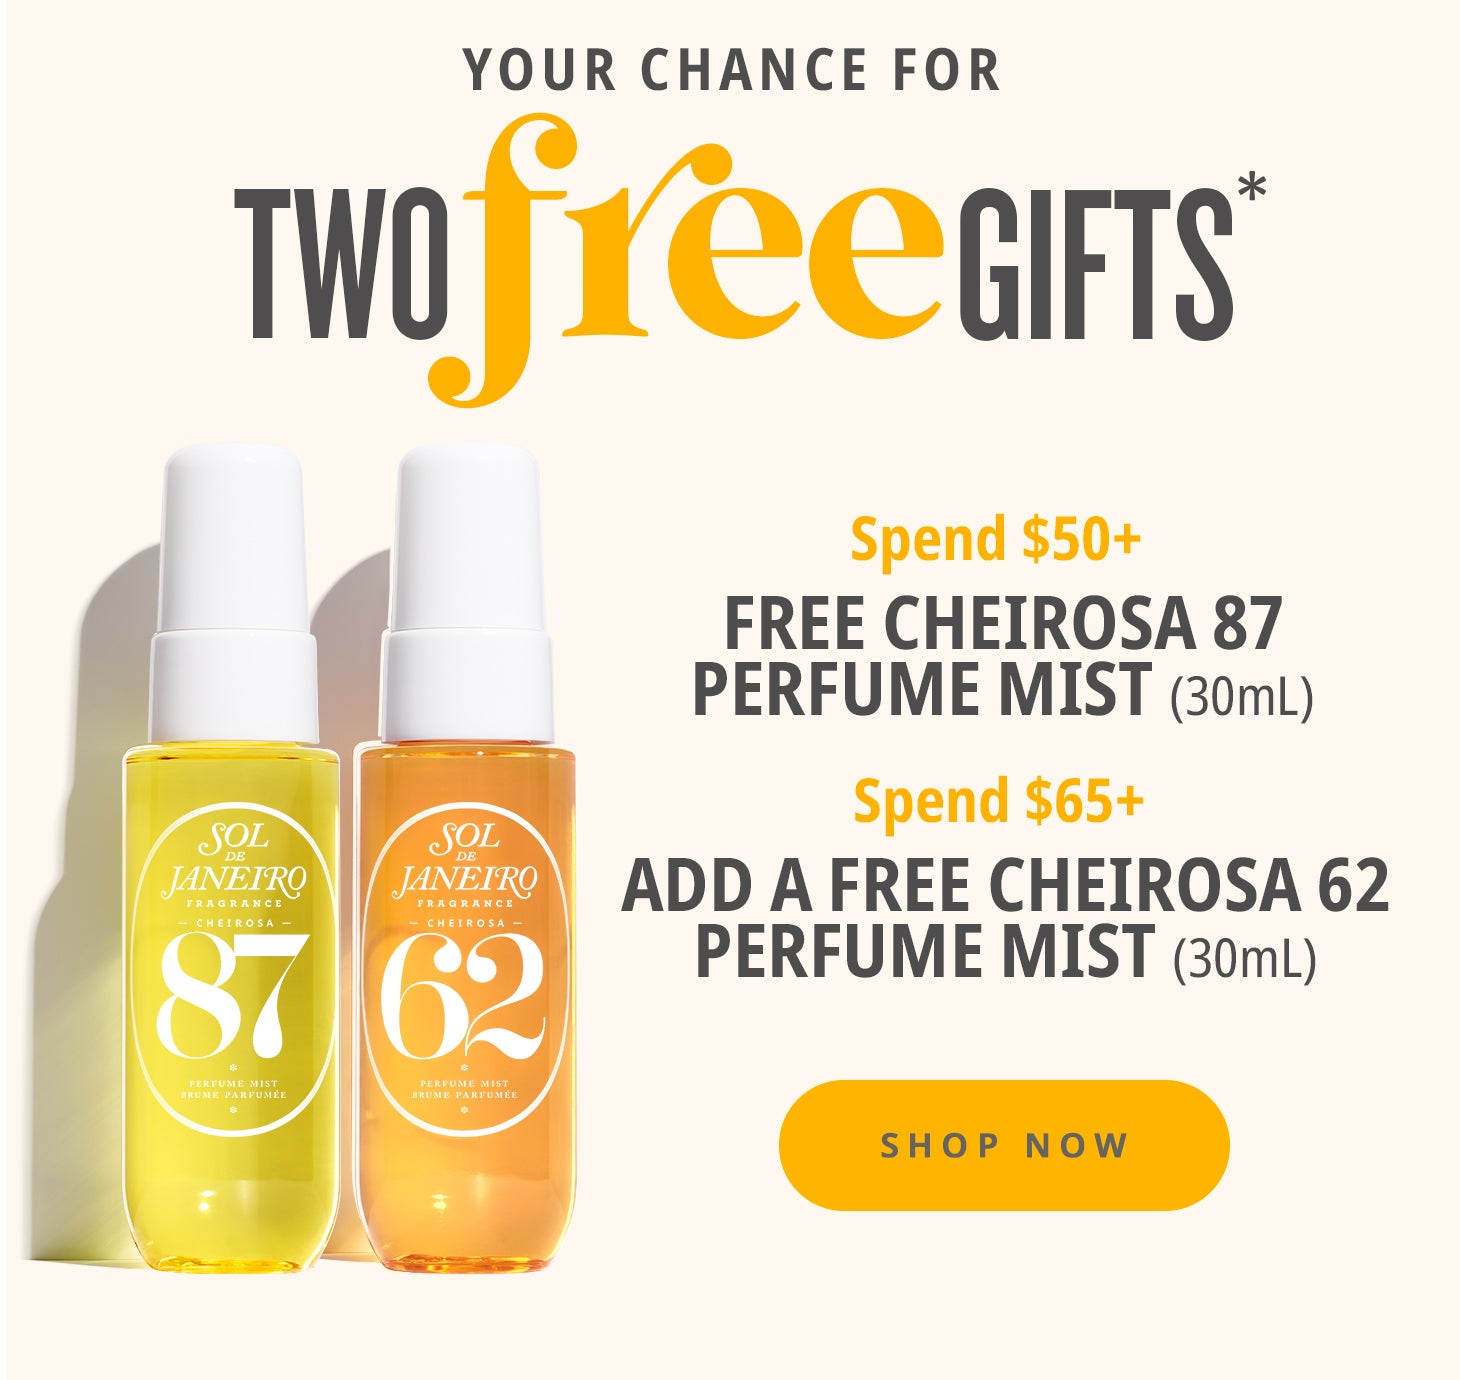 Your chance for two free gifts - spend $50 get free cheirosa 87 perfume mist (30ml), spend $65+ add a free cheirosa 62 perfume mist (30ml).